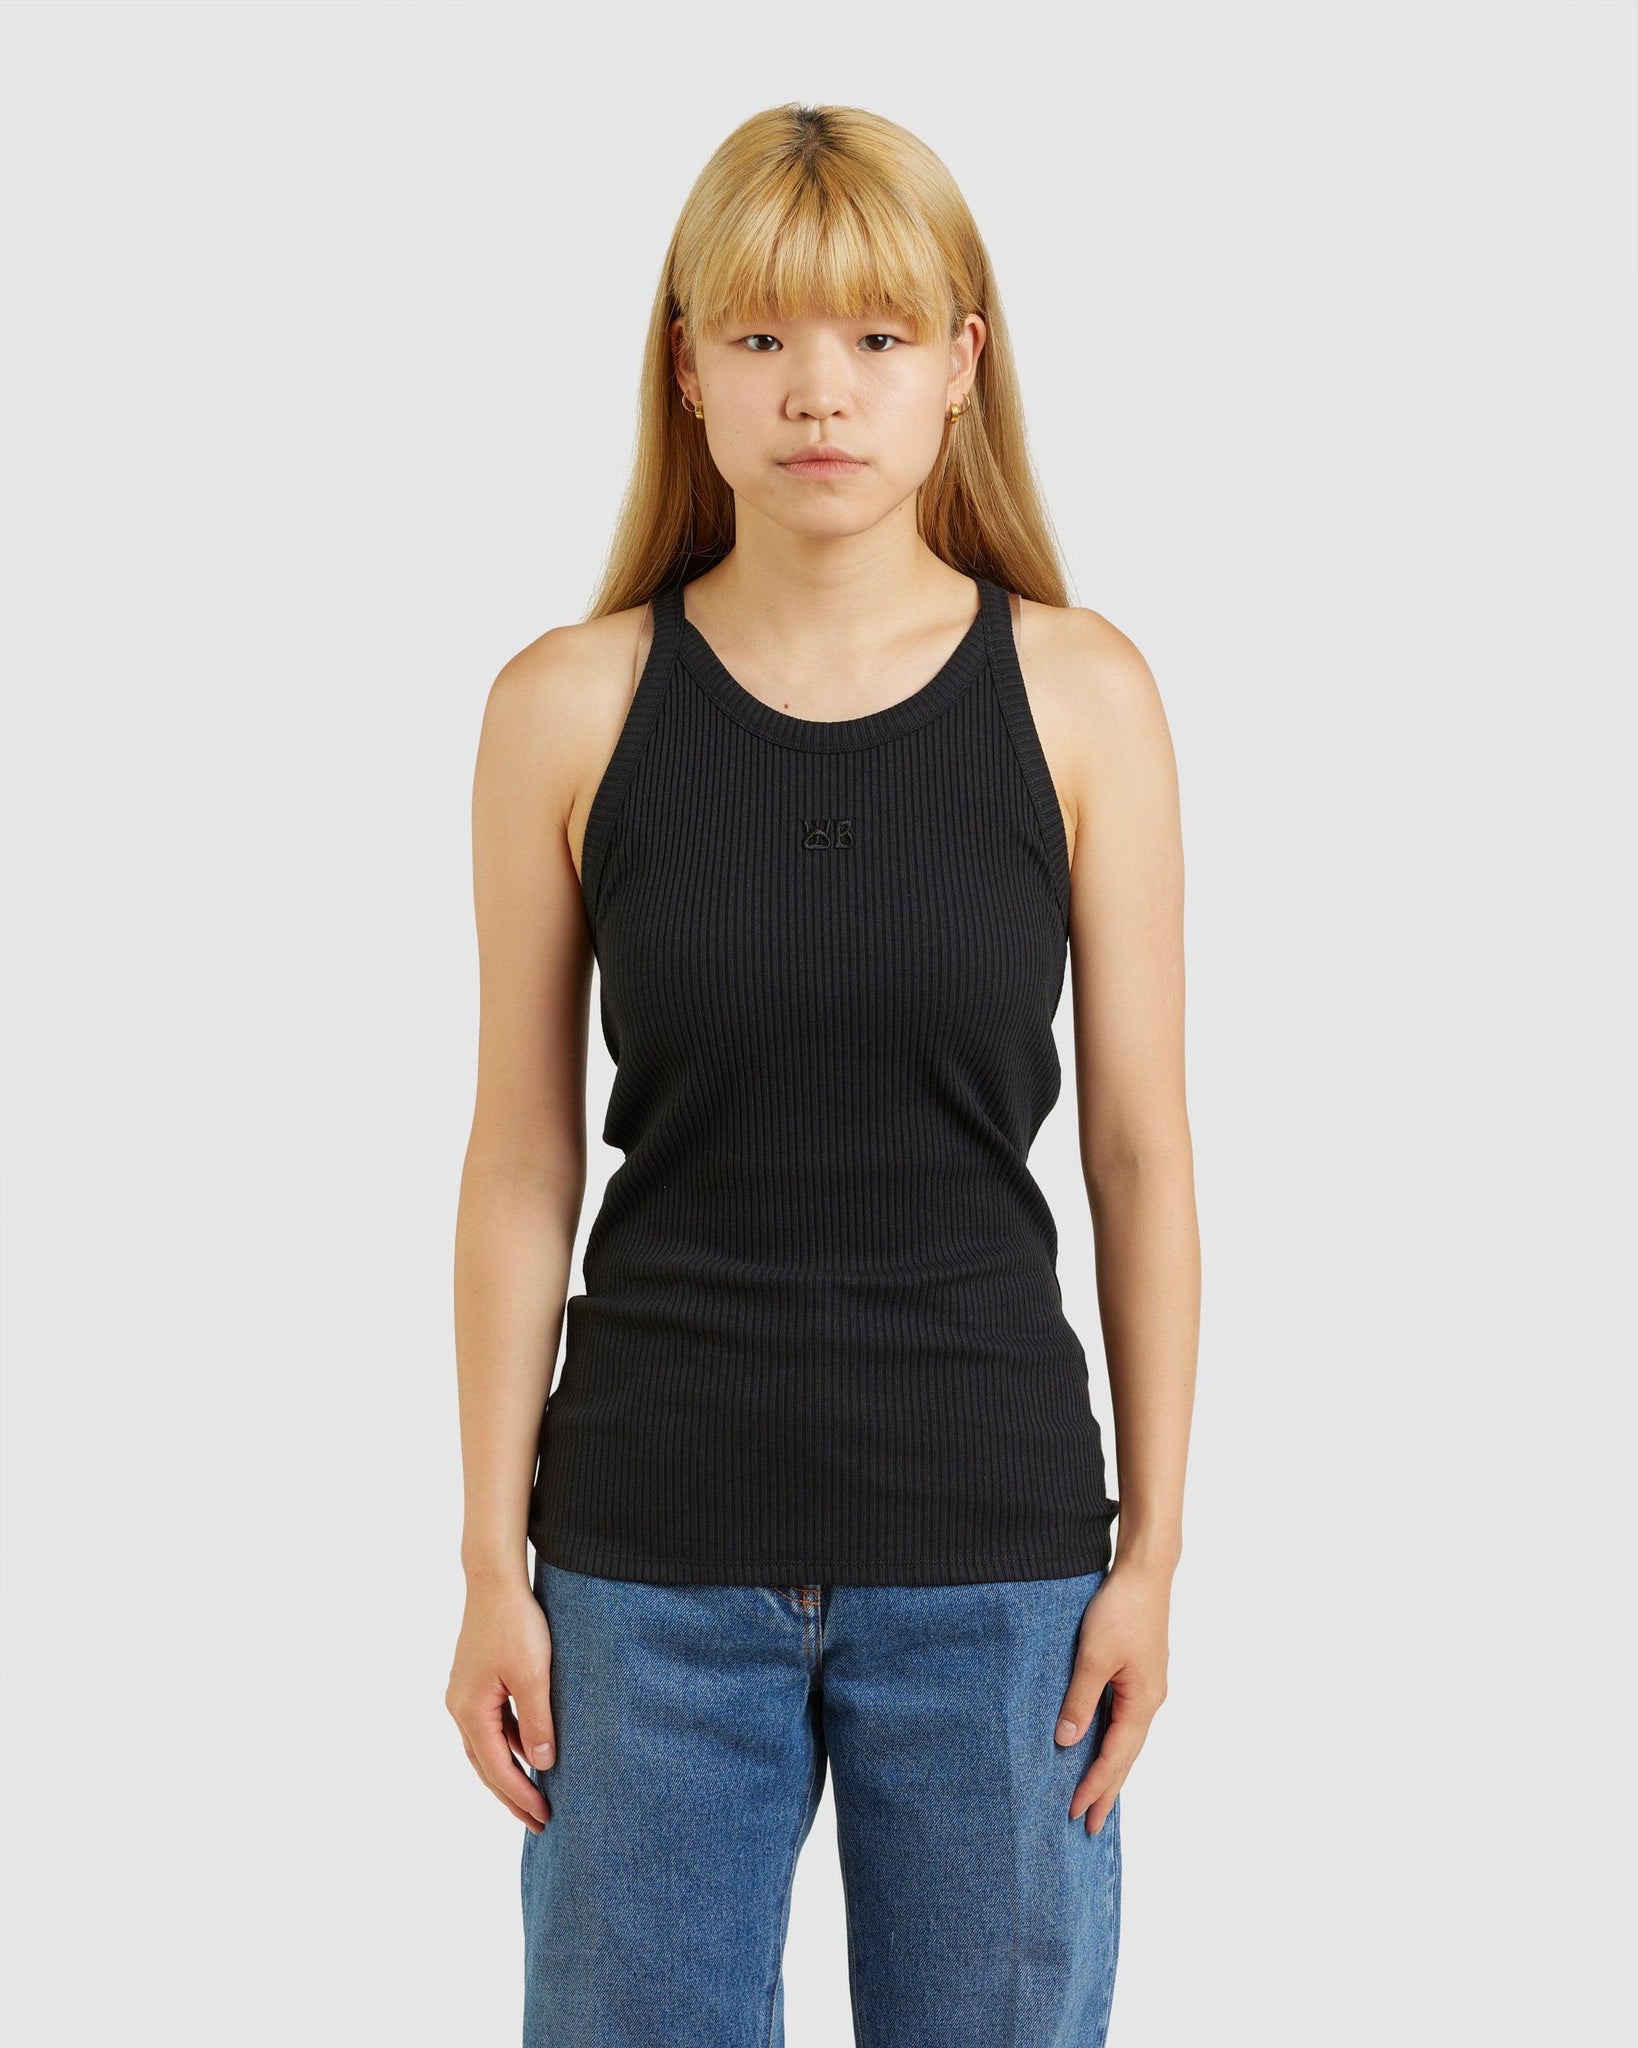 Groove Tank Top - {{ collection.title }} - Chinatown Country Club 